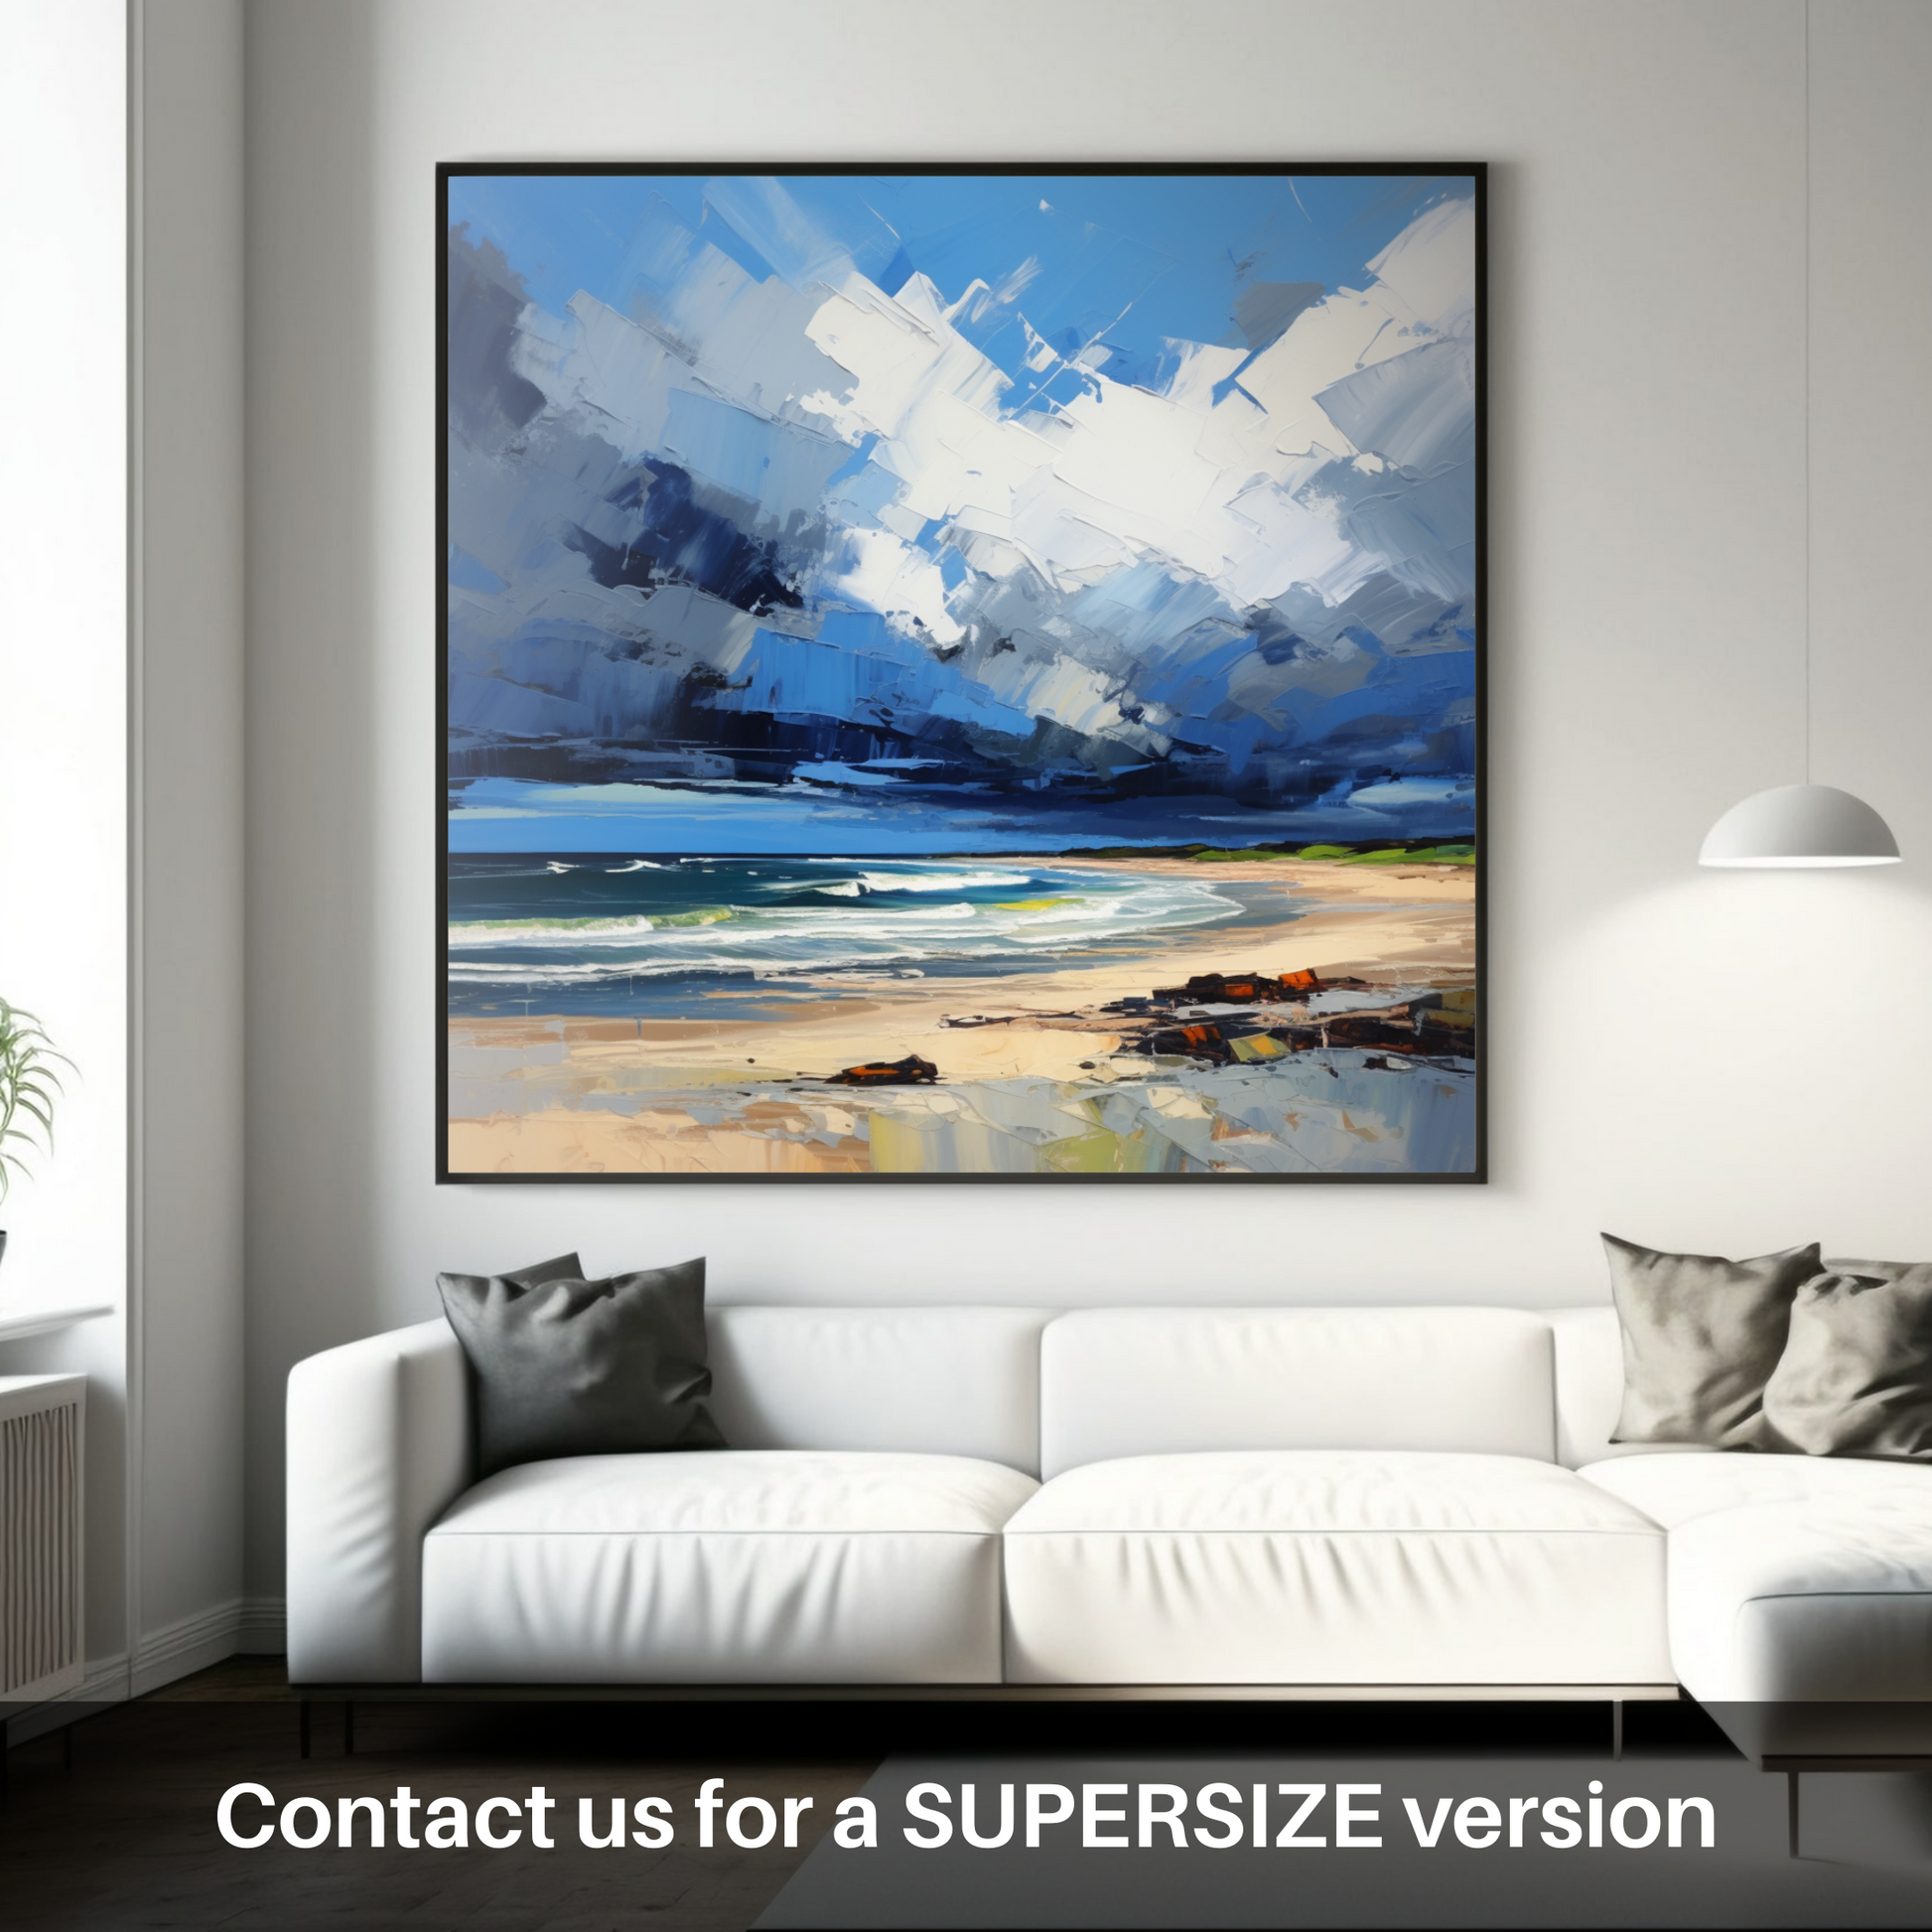 Huge supersize print of Gullane Beach with a stormy sky